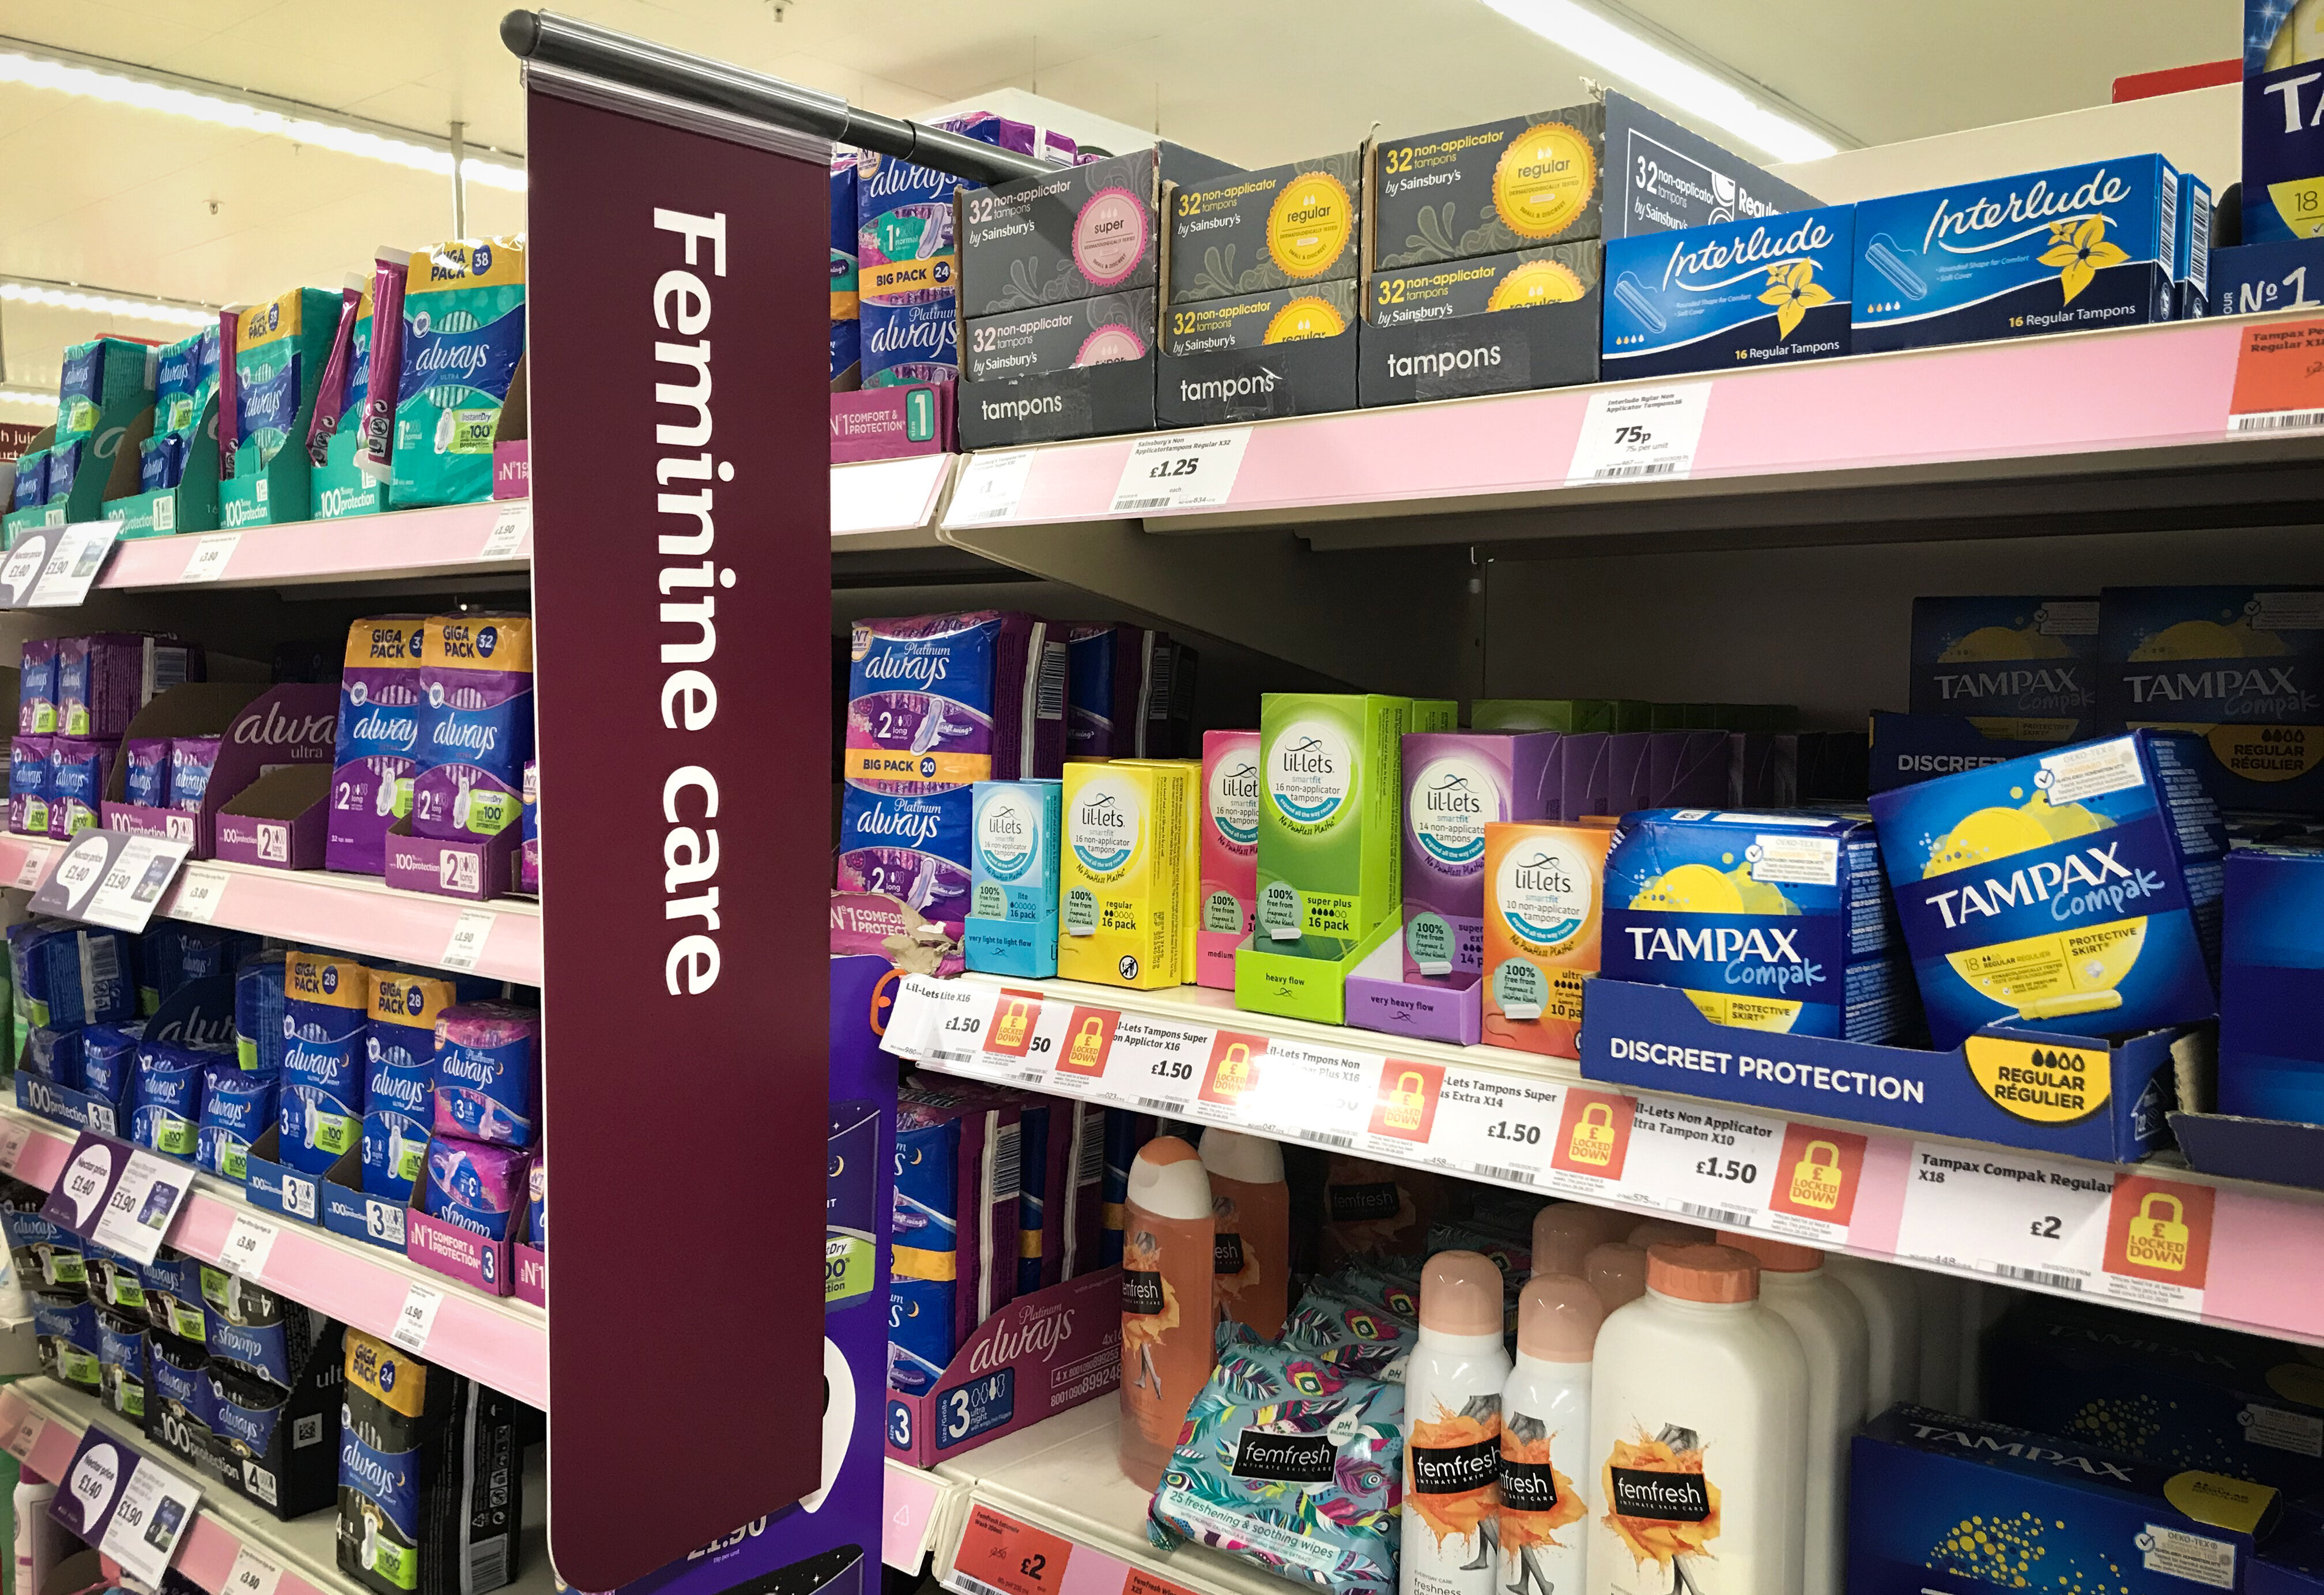 A supermarket aisle filled with various feminine care products such as tampons, pads, and sanitary napkins, with a sign labeled &quot;Feminine care.&quot;